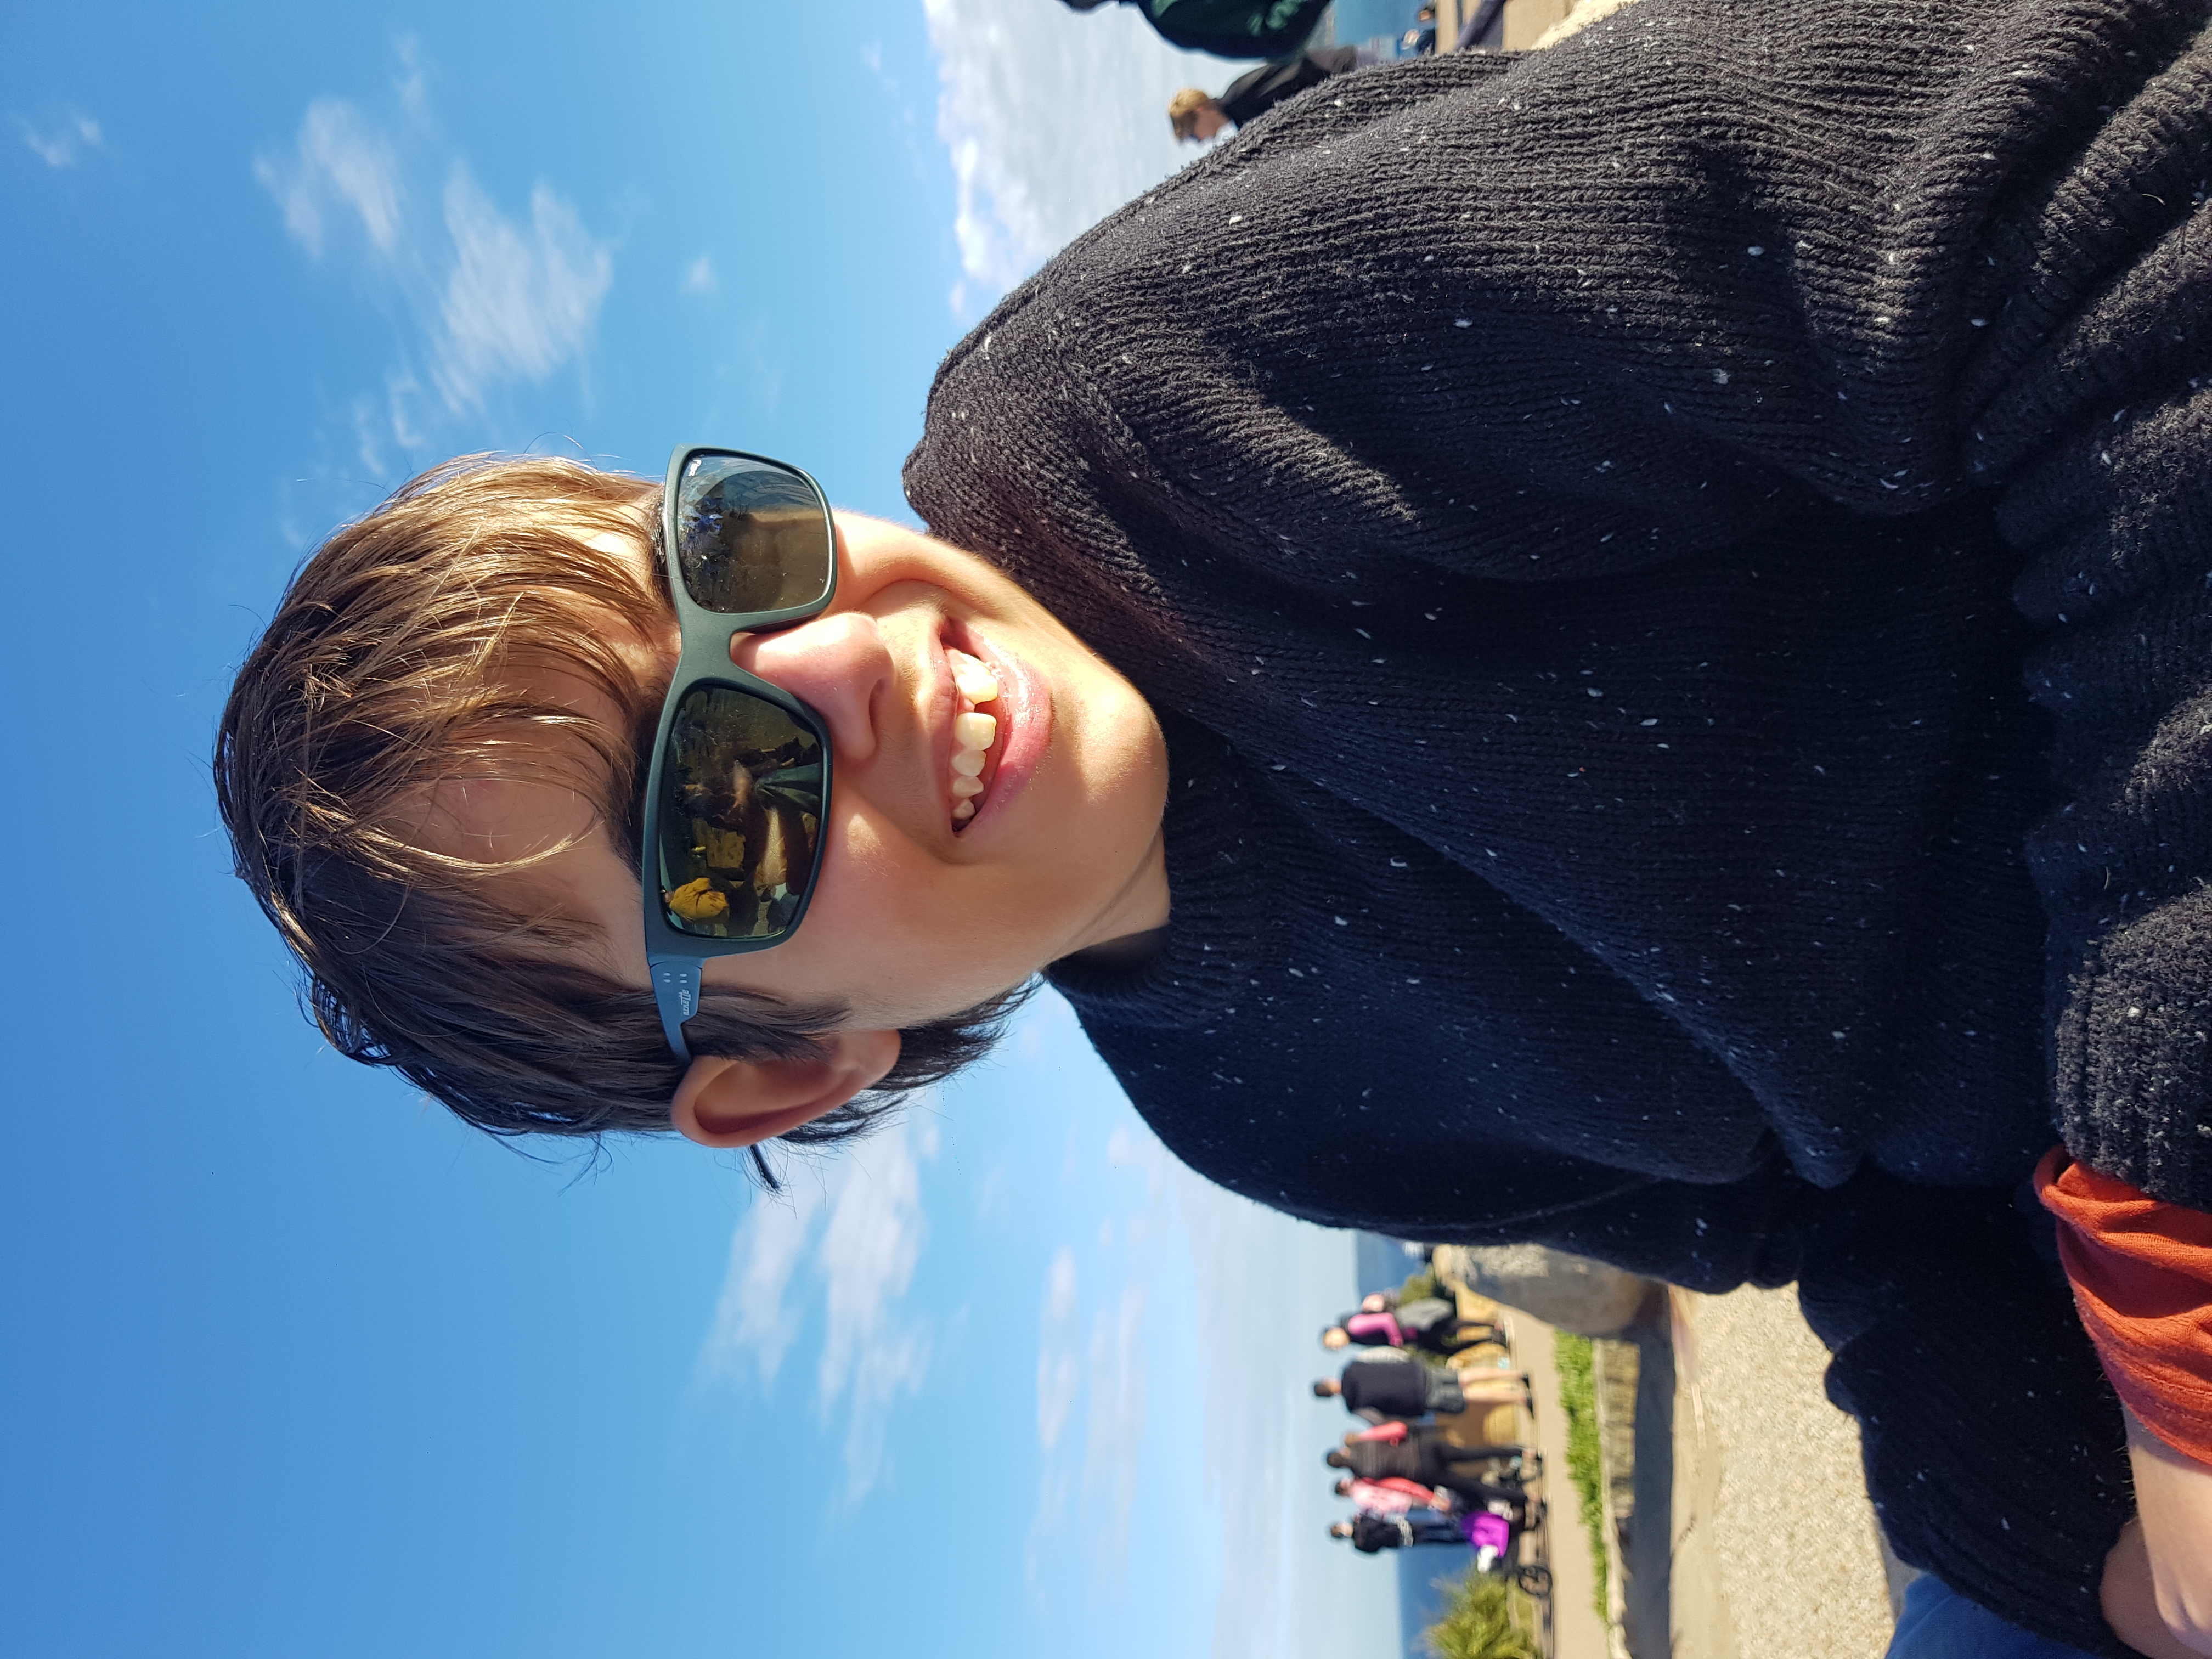 A photo of Luca wearing a dark sweater and sunglasses, sitting in the sun. The sky is bright blue behind him, and he is smiling at the camera.